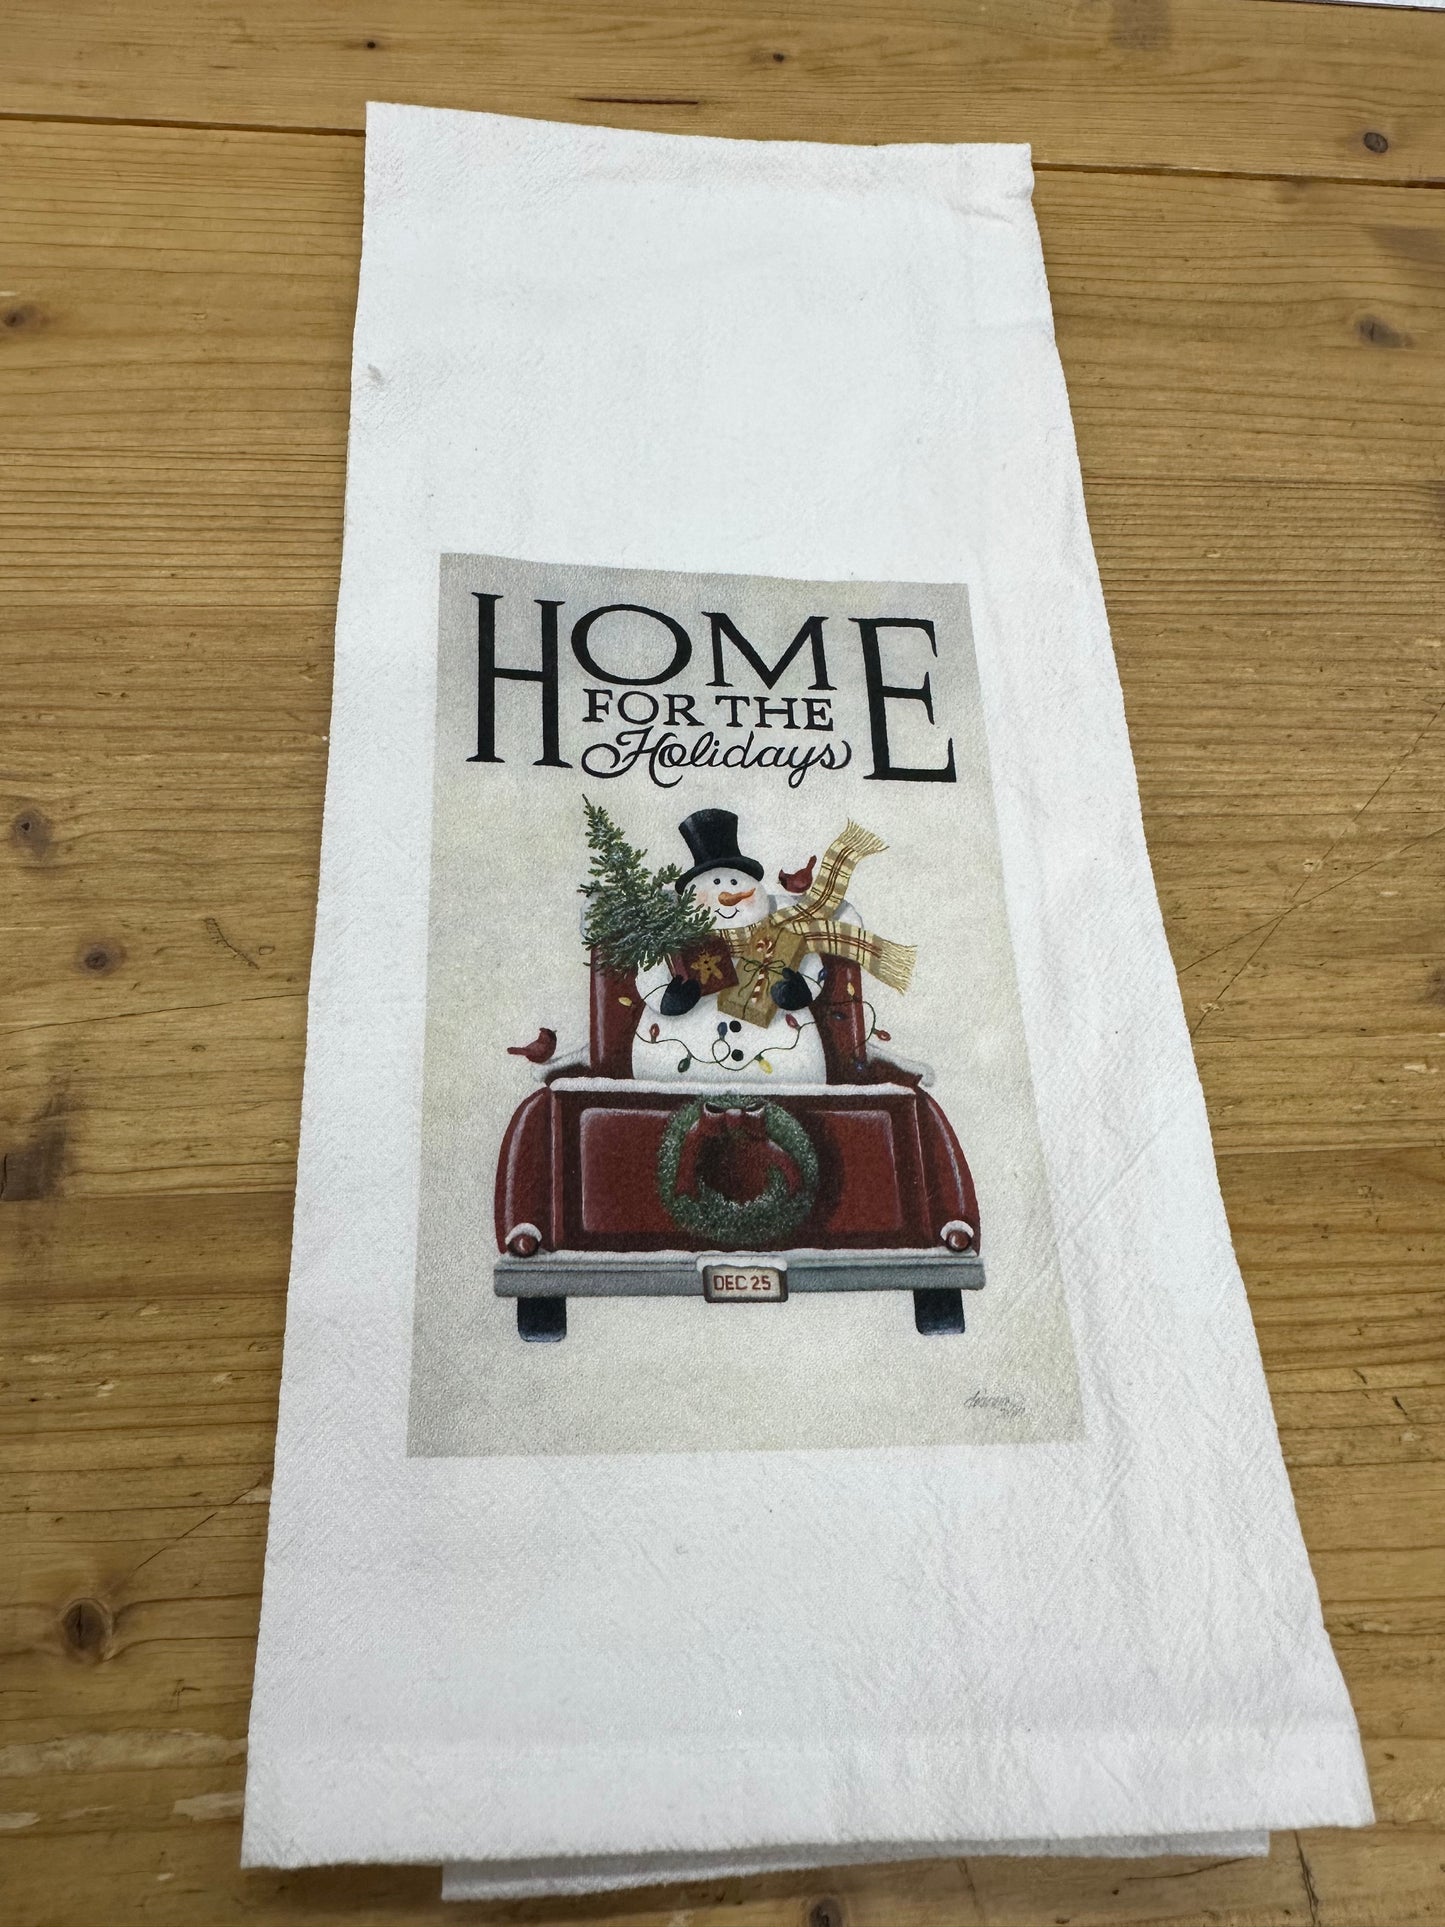 Home for the holidays hand towel